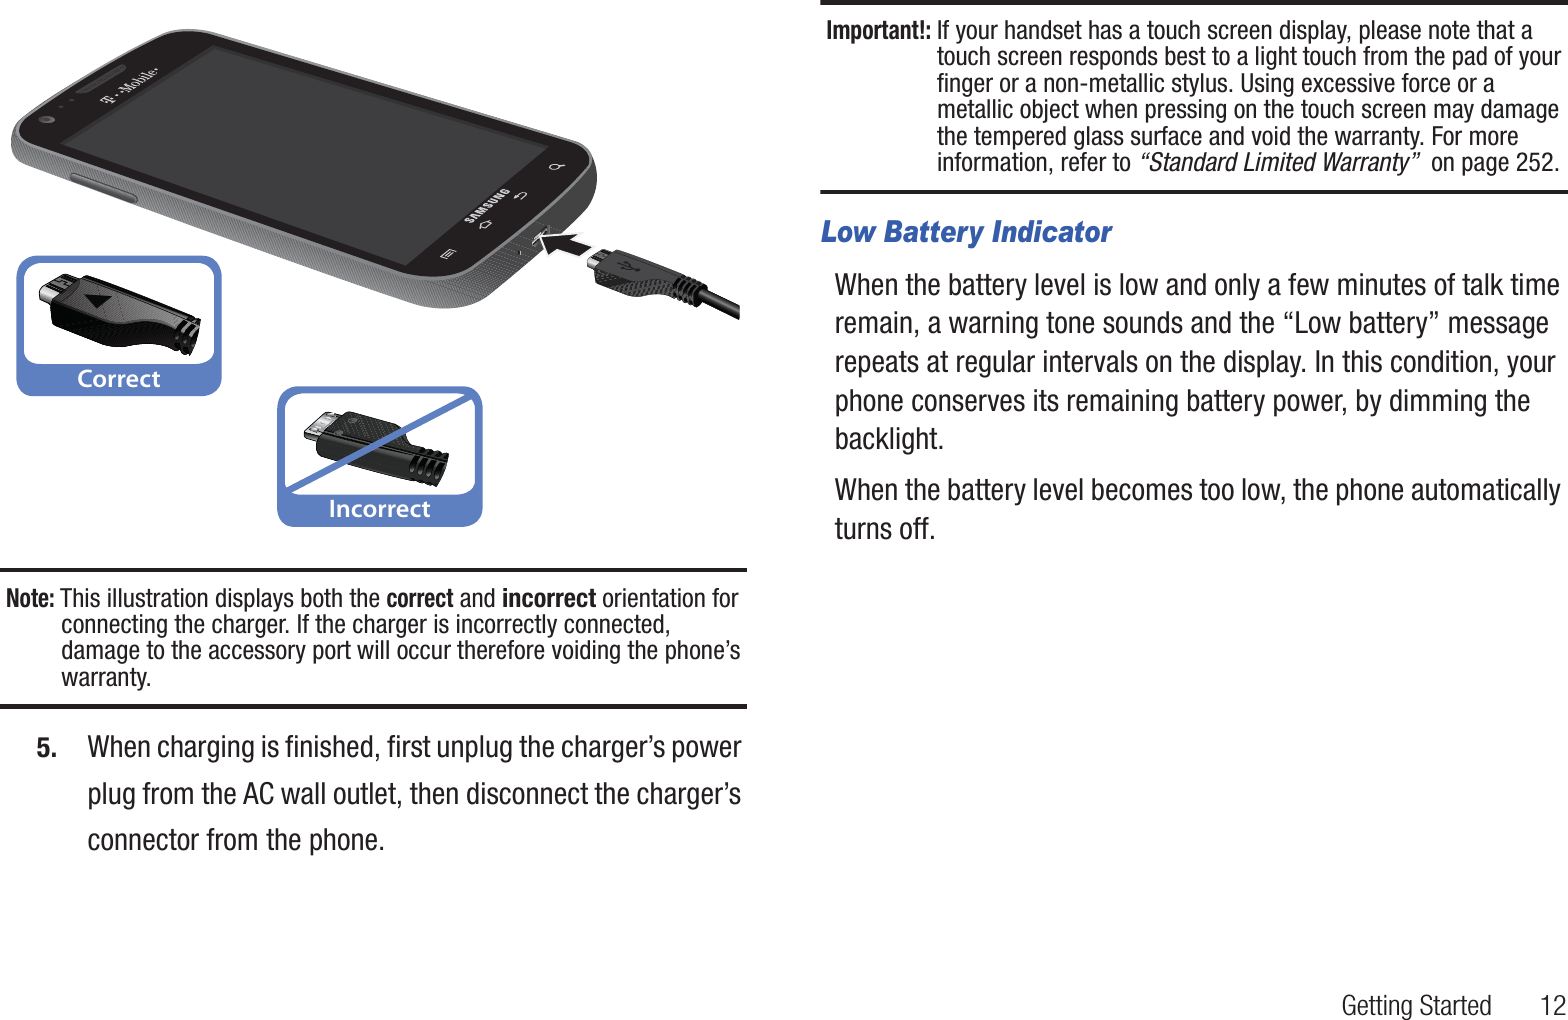 Getting Started       12 Note: This illustration displays both the correct and incorrect orientation for connecting the charger. If the charger is incorrectly connected, damage to the accessory port will occur therefore voiding the phone’s warranty.5. When charging is finished, first unplug the charger’s power plug from the AC wall outlet, then disconnect the charger’s connector from the phone.Important!: If your handset has a touch screen display, please note that a touch screen responds best to a light touch from the pad of your finger or a non-metallic stylus. Using excessive force or a metallic object when pressing on the touch screen may damage the tempered glass surface and void the warranty. For more information, refer to “Standard Limited Warranty”  on page 252.Low Battery IndicatorWhen the battery level is low and only a few minutes of talk time remain, a warning tone sounds and the “Low battery” message repeats at regular intervals on the display. In this condition, your phone conserves its remaining battery power, by dimming the backlight.When the battery level becomes too low, the phone automatically turns off.CorrectIncorrect